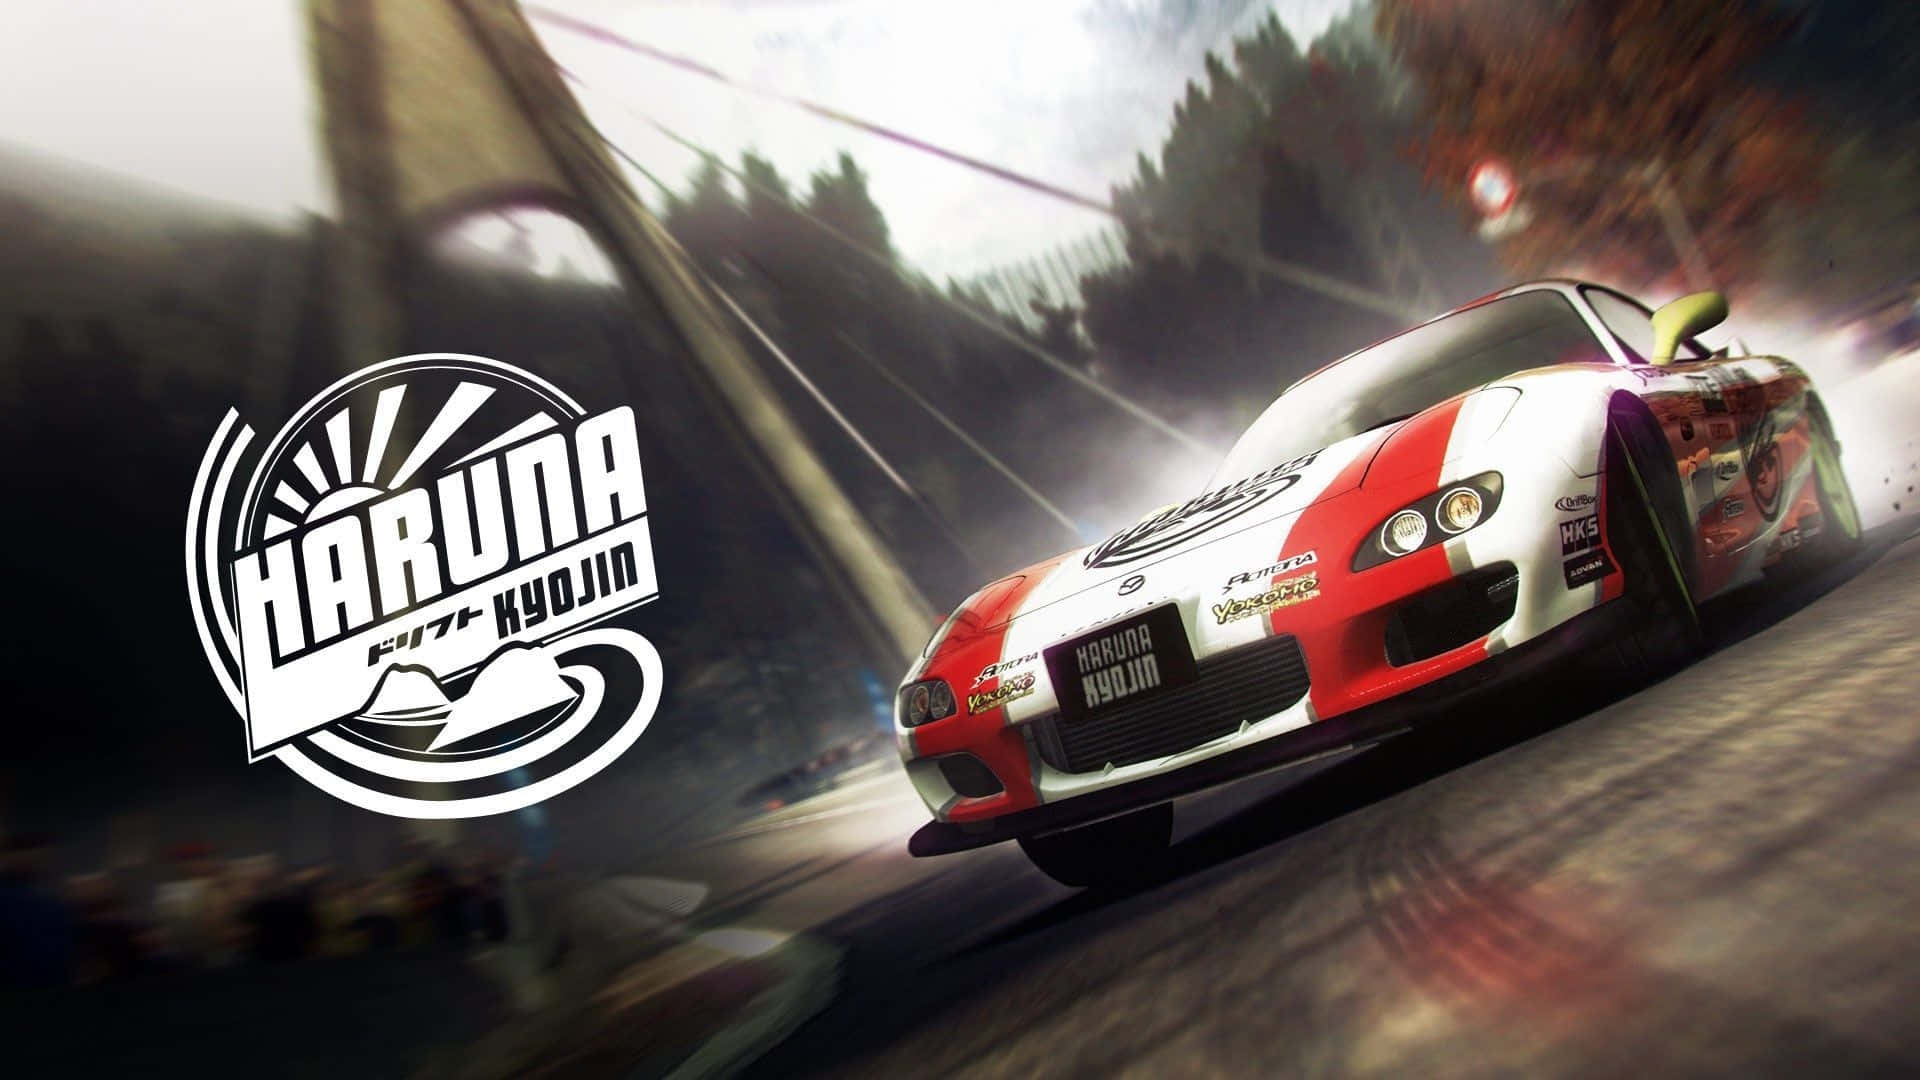 Hd Grid 2 Background Haruna Kyojin Poster With A White Car